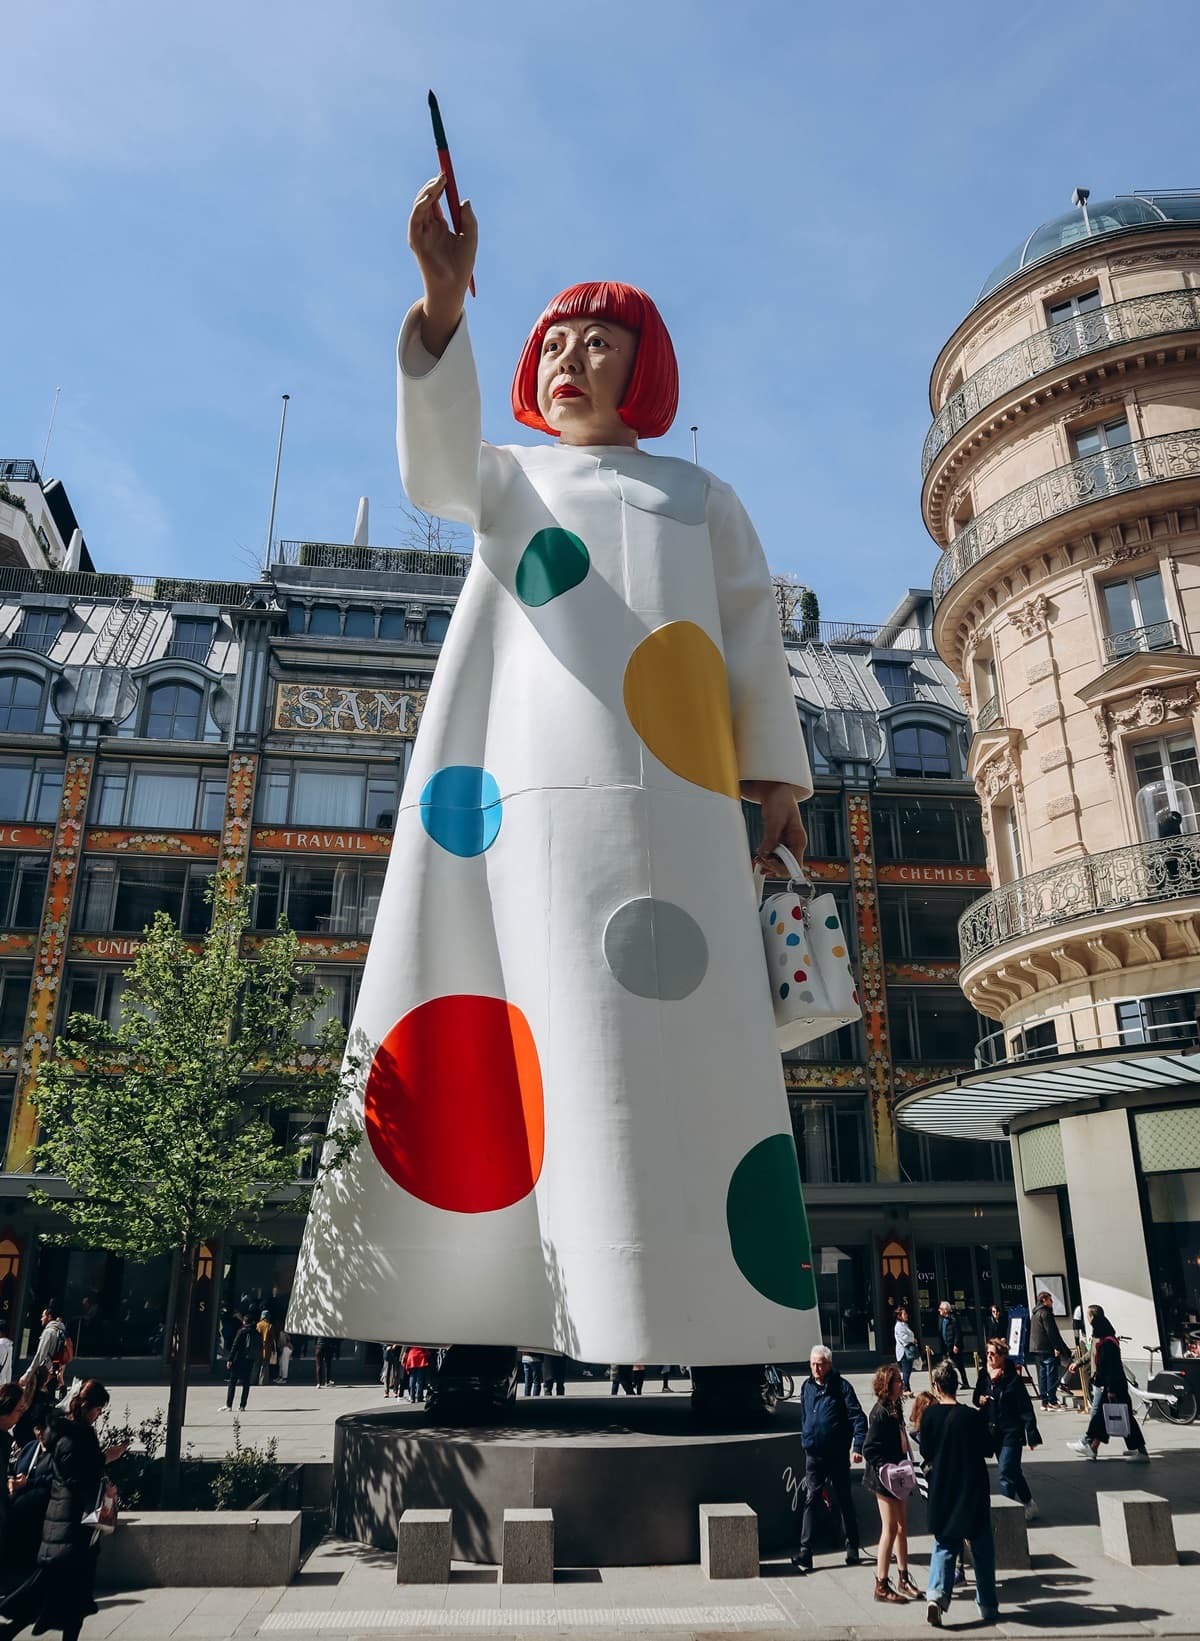 Yayoi Kusama, an avant-garde Japanese contemporary artist, is recognized for her contributions as a painter, sculptor, and writer, while her artistic style is characterized by the prominent use of polka dots and vibrant colors throughout her works